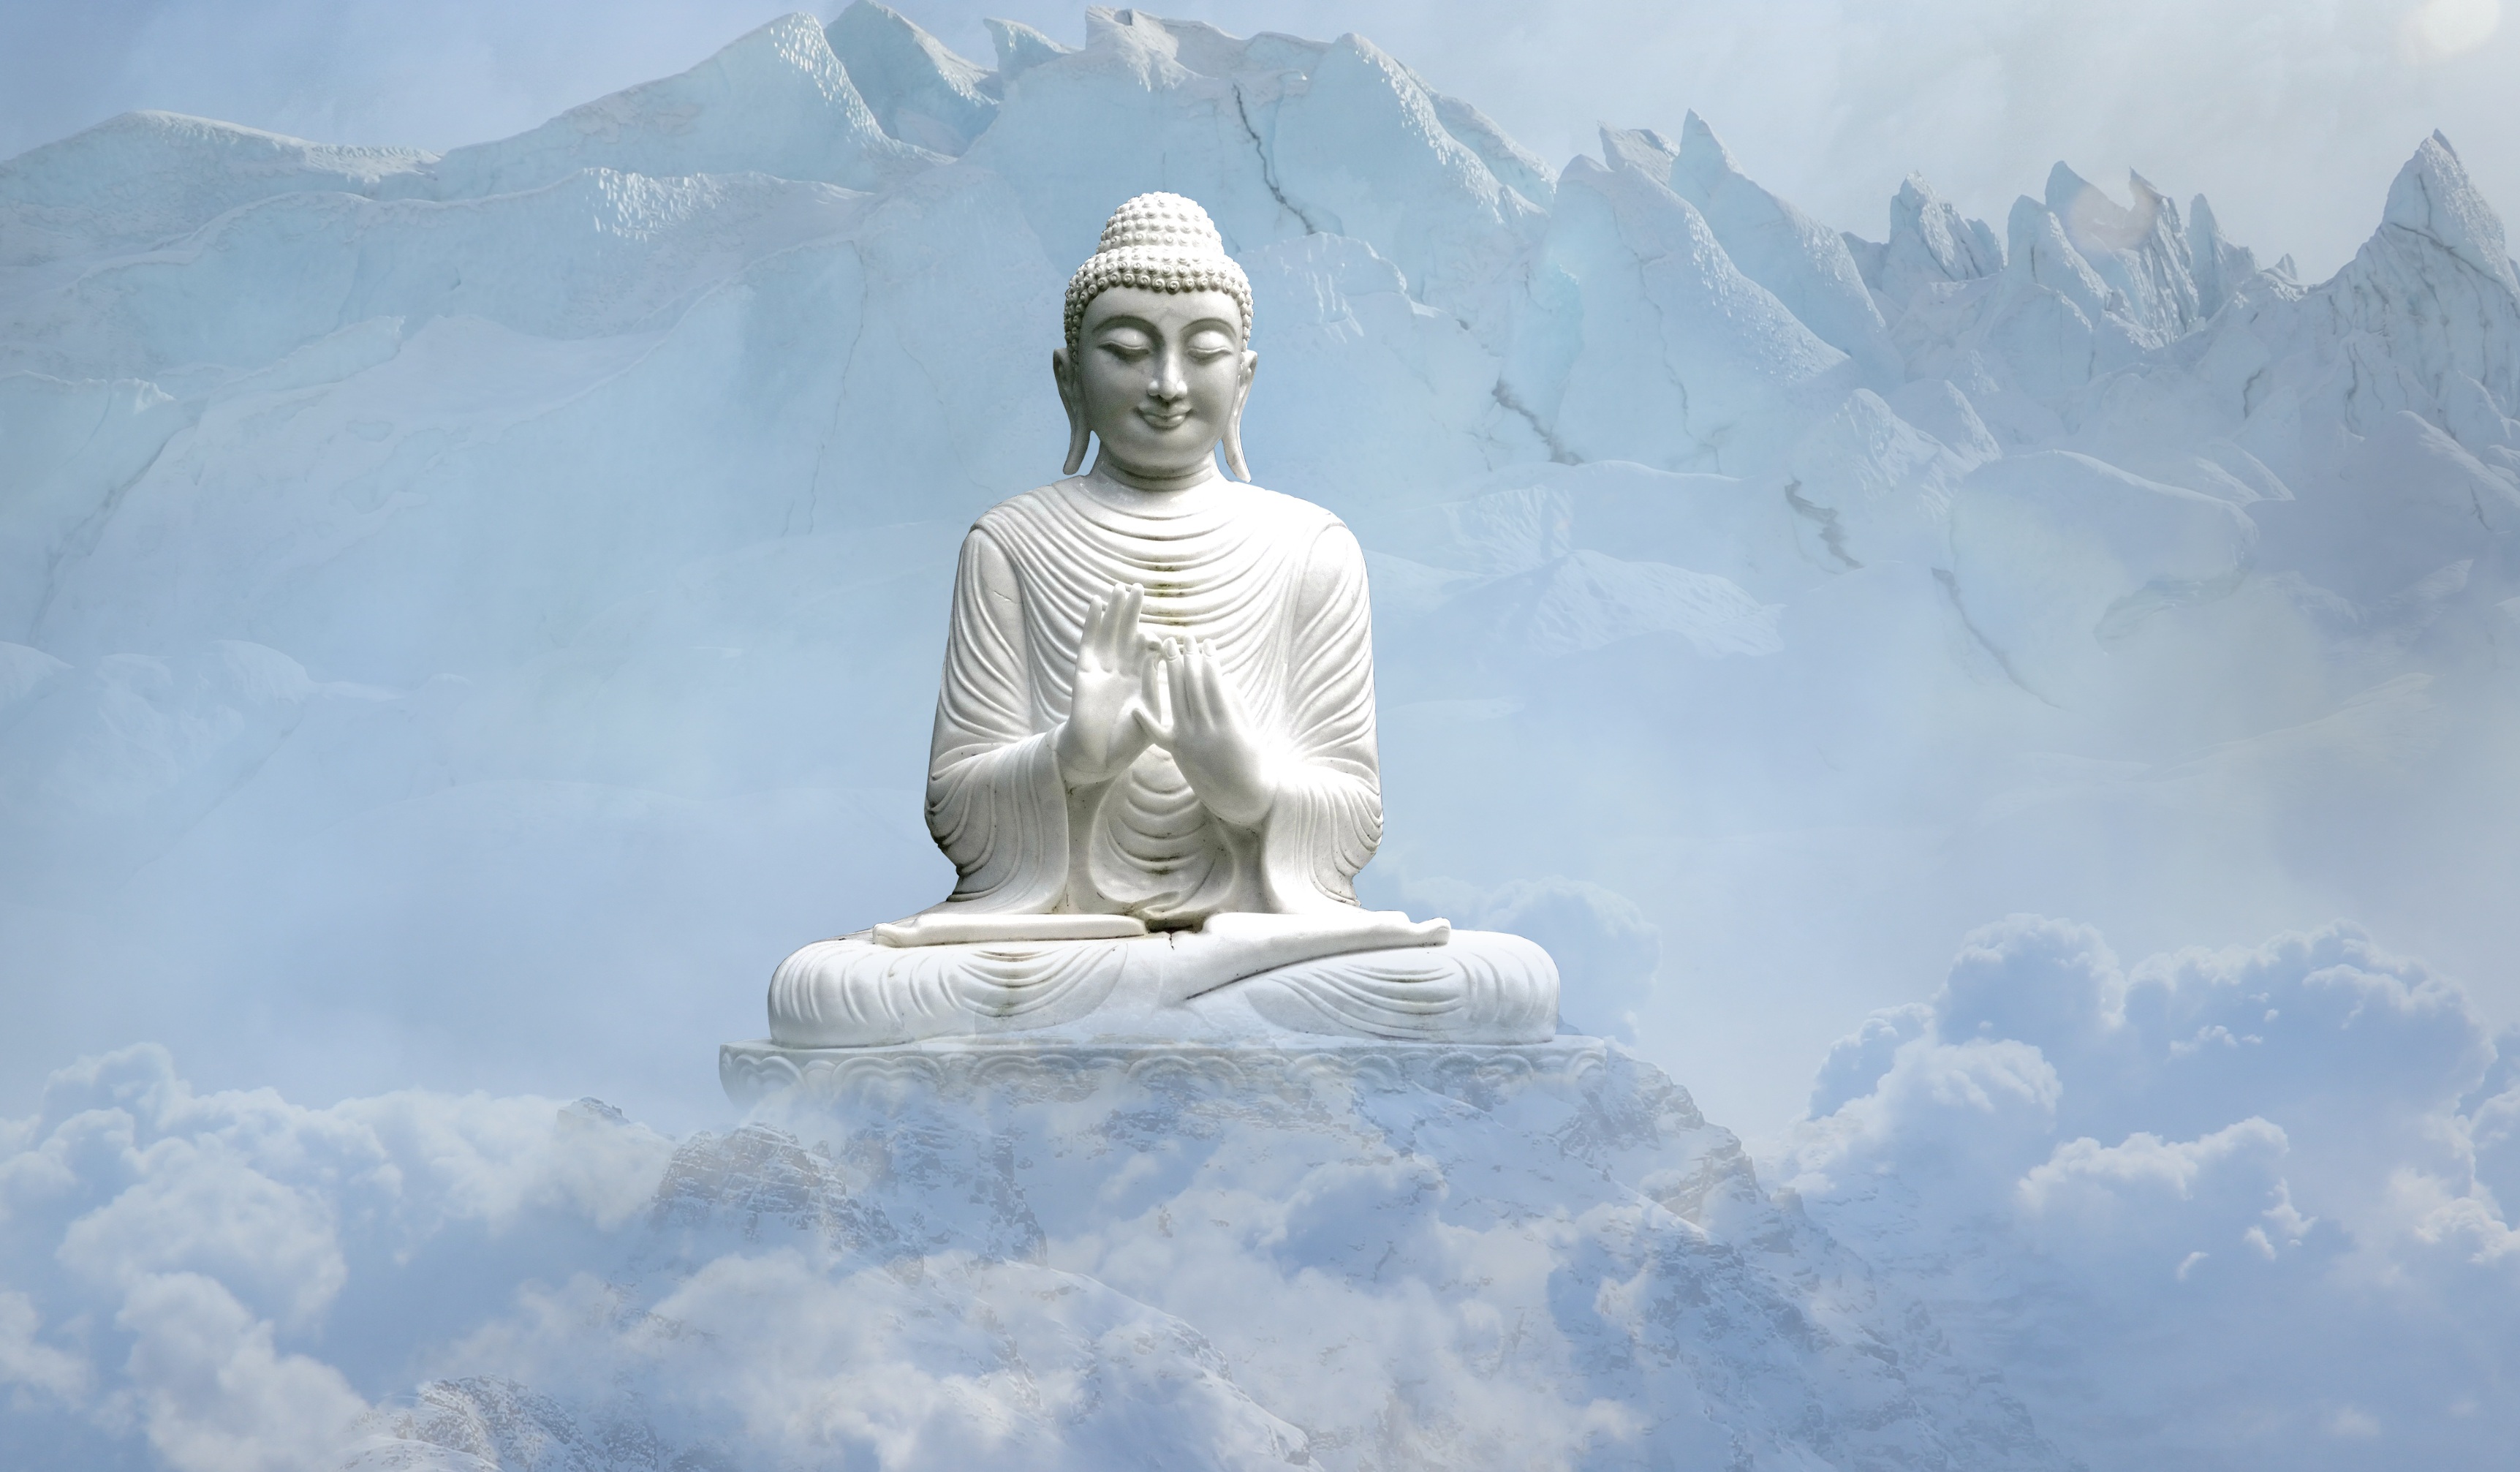 Buddha Statue in the Mountains by Marisa04